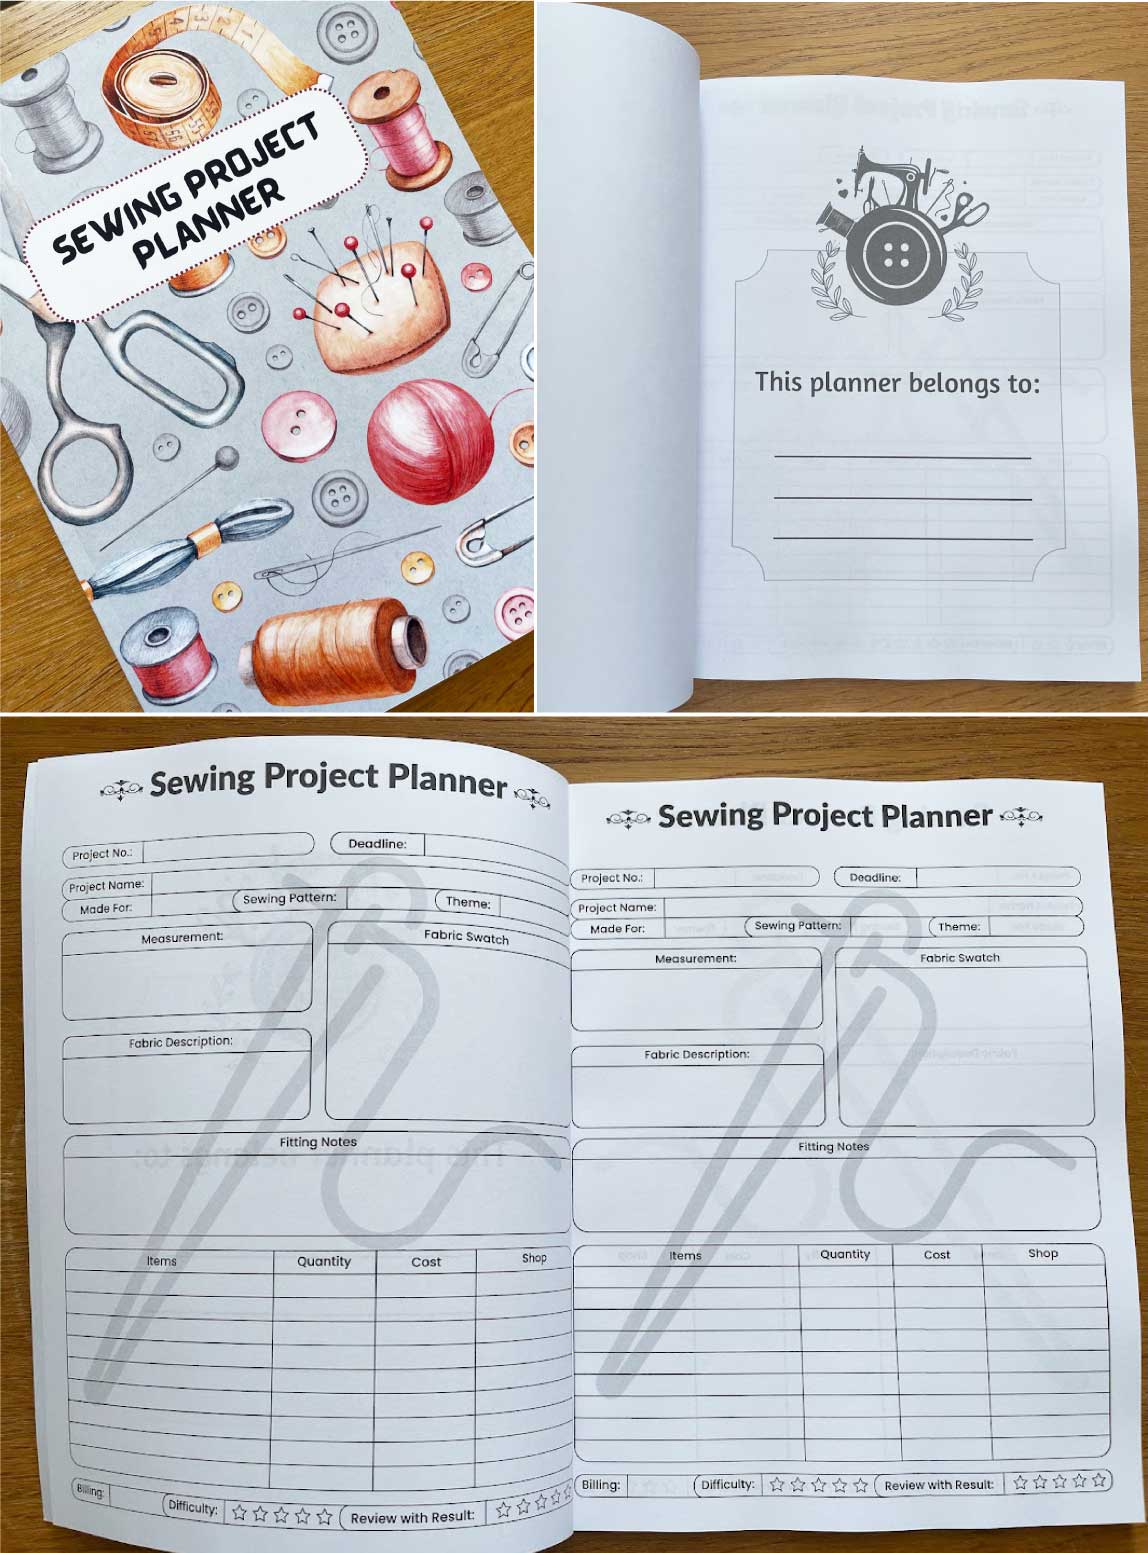 Project planner/journal